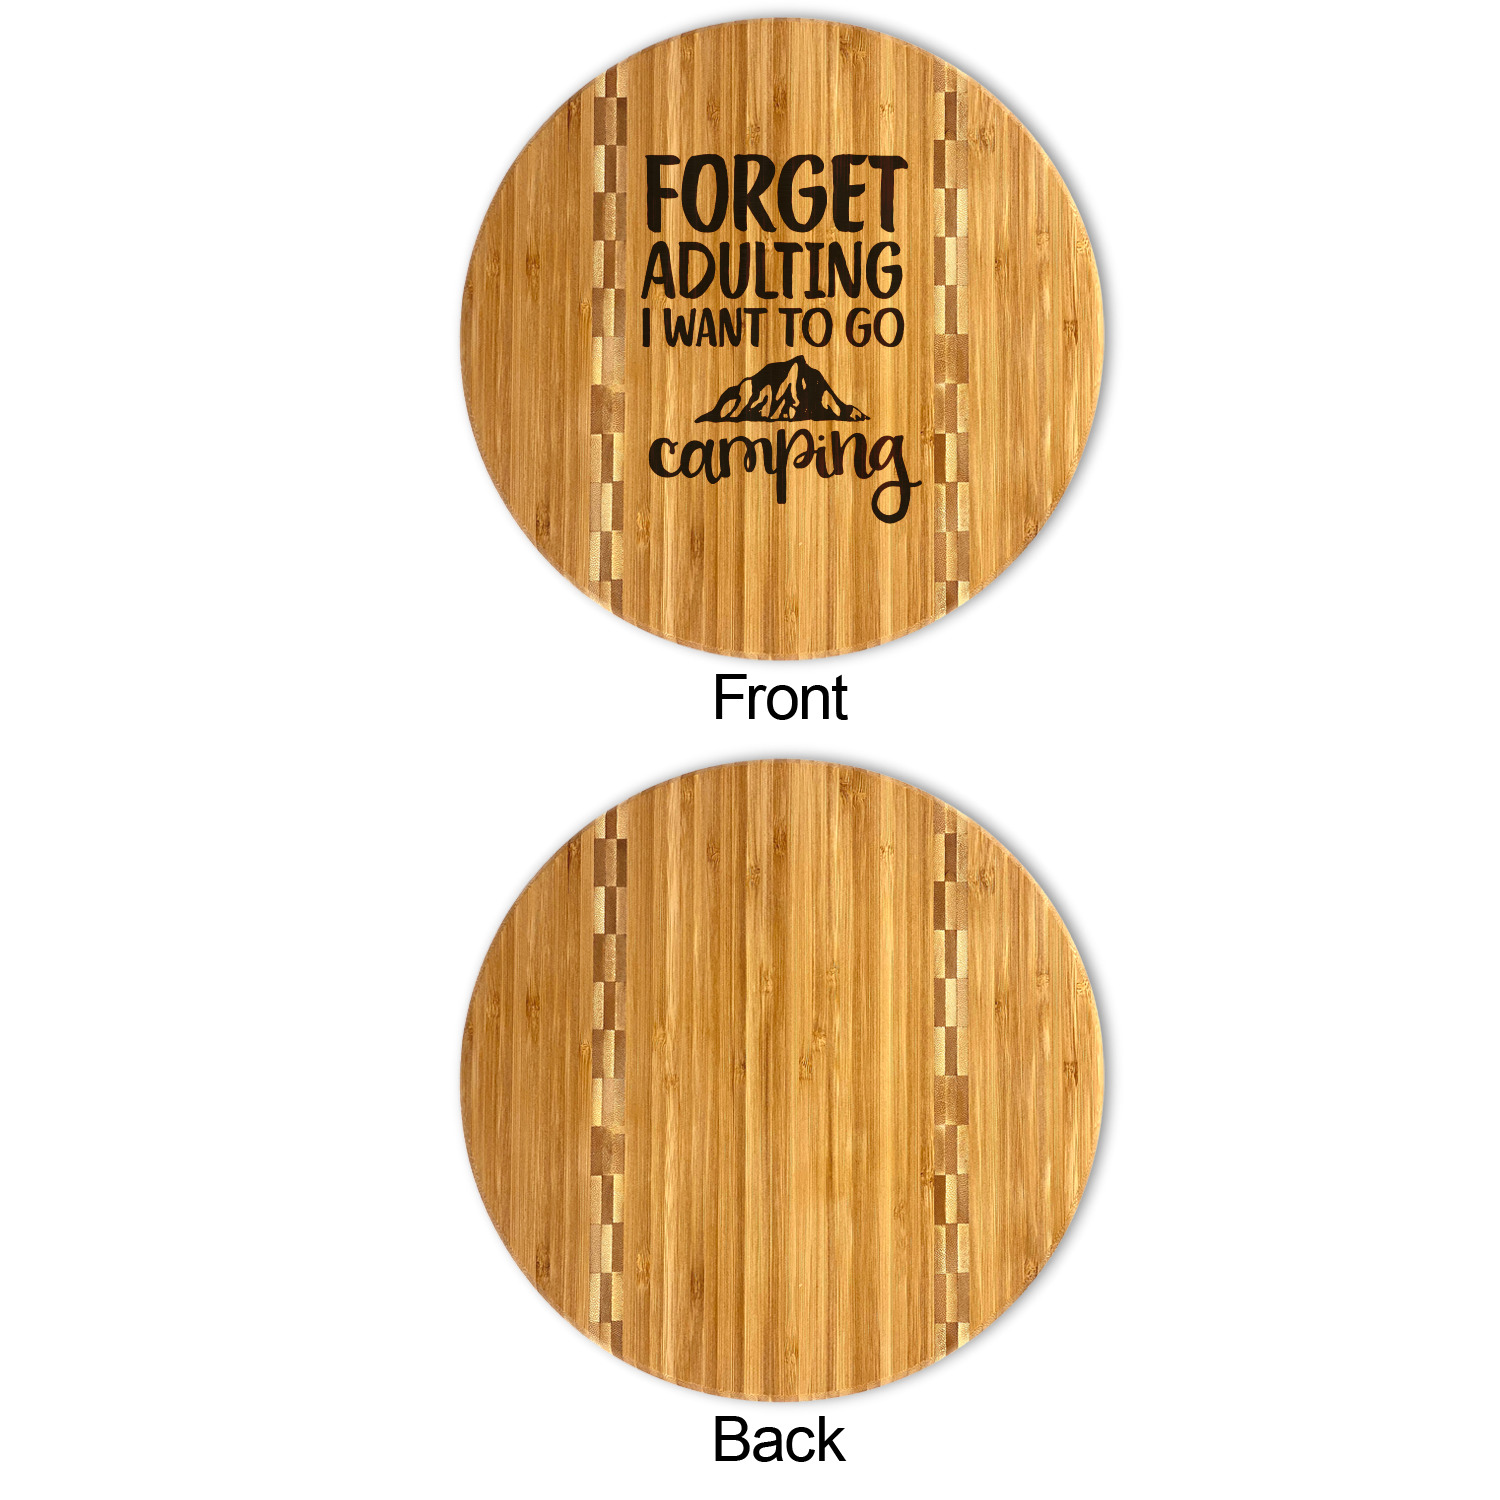 https://www.youcustomizeit.com/common/MAKE/1030867/Camping-Quotes-Sayings-Bamboo-Cutting-Boards-APPROVAL.jpg?lm=1658265452